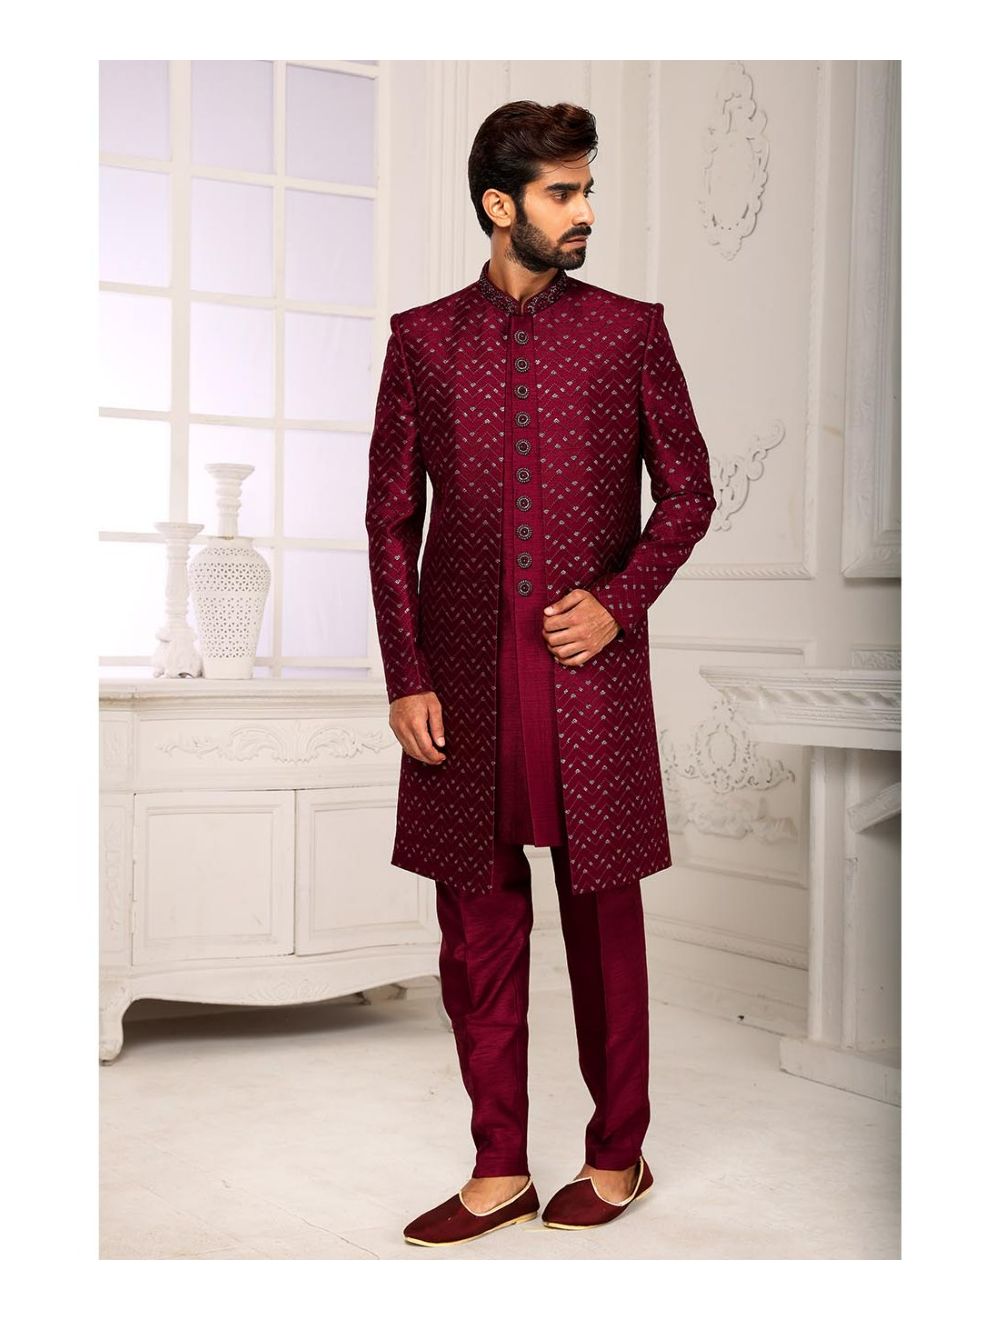 How To Match Bridal Lehengas With The Groom's Sherwani - Nihal Fashions Blog